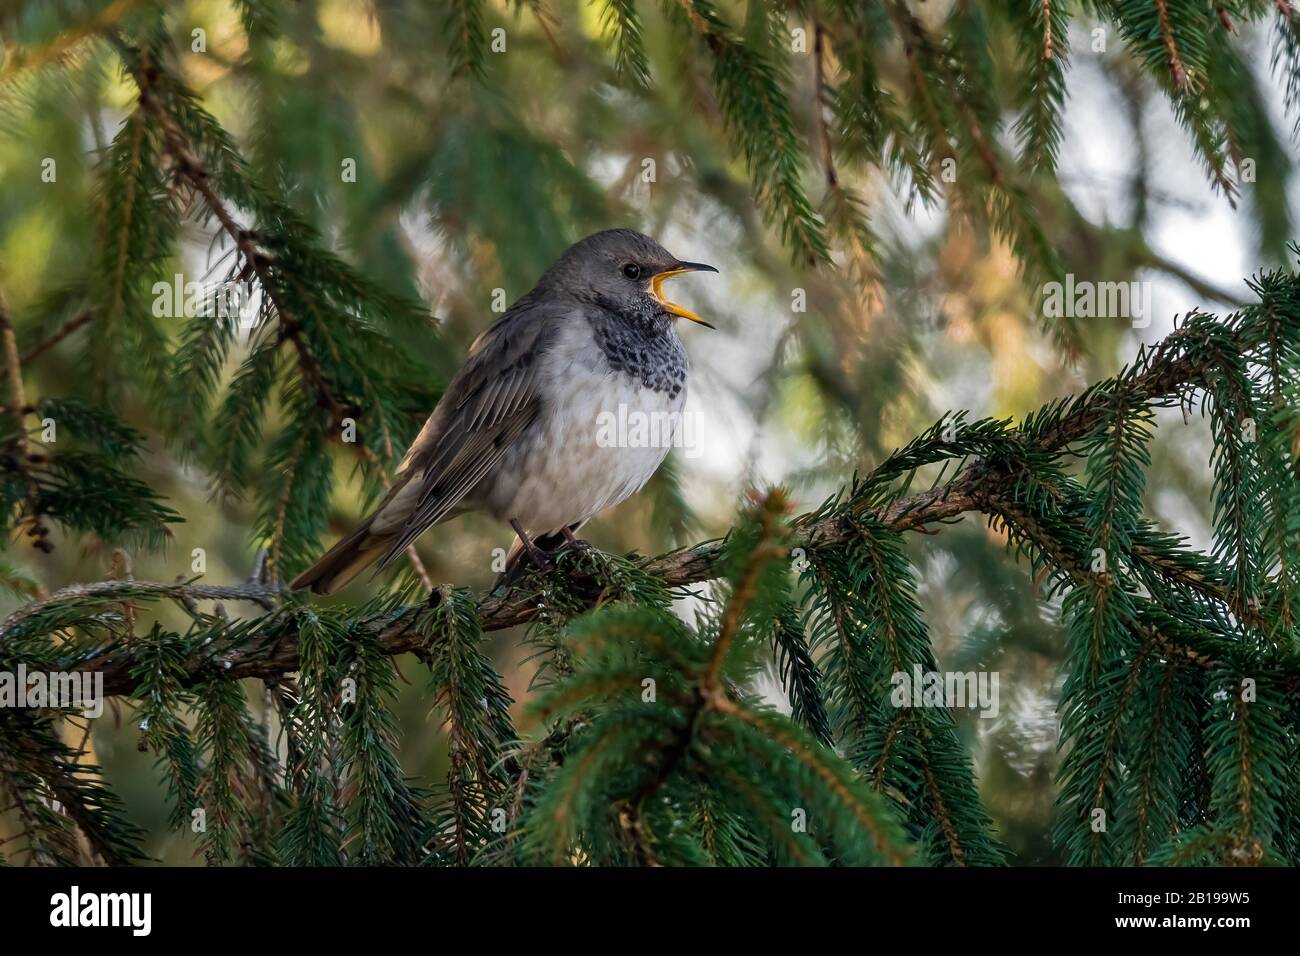 Black-throated Thrush (Turdus atrogularis), first winter male perched on a pine tree in a garden, Netherlands, Groningen Stock Photo